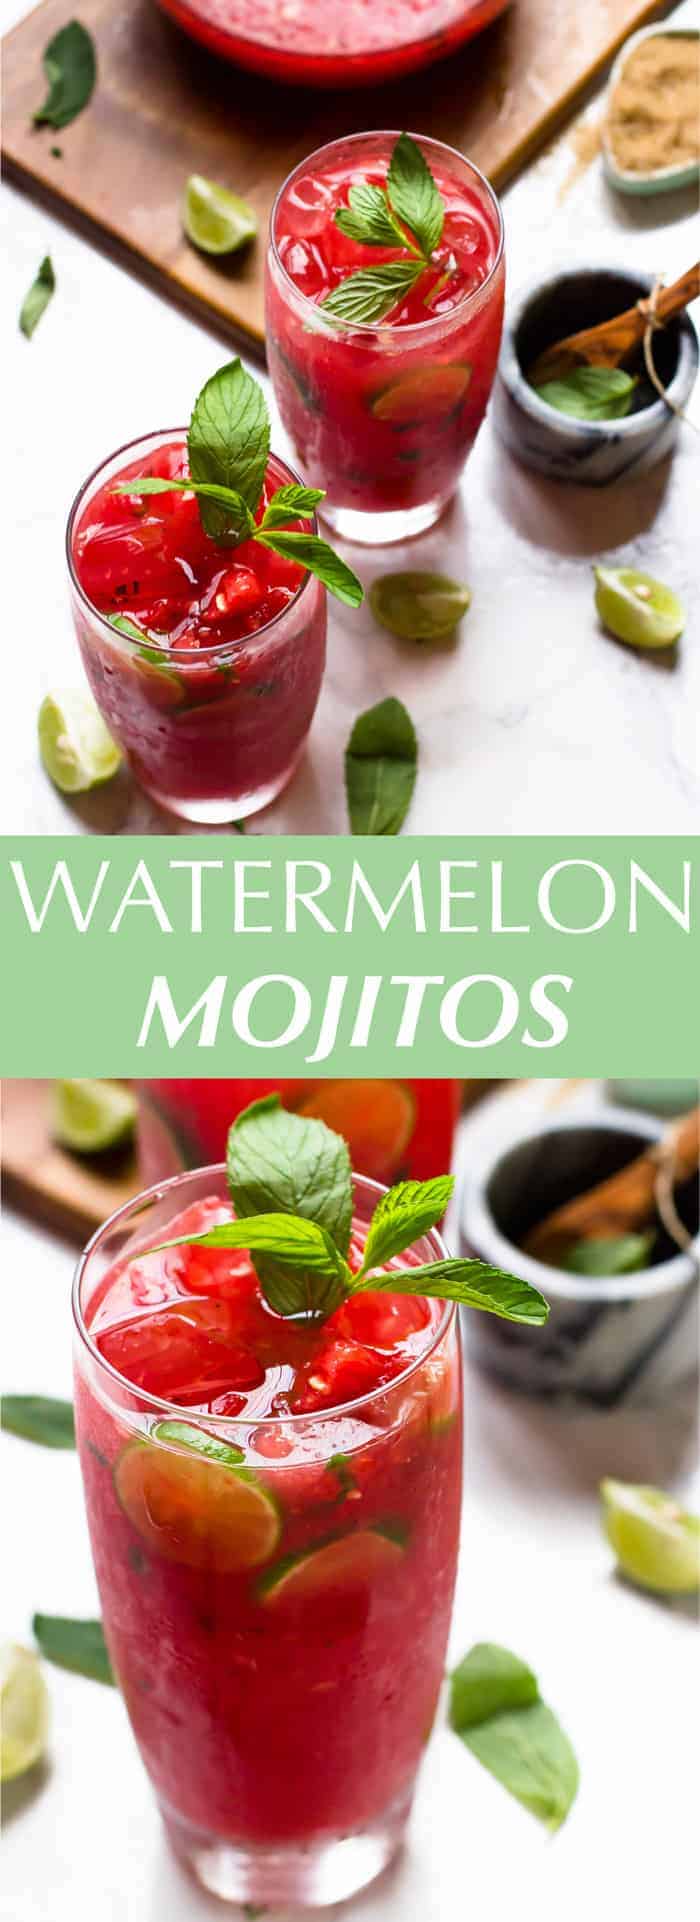 These Watermelon Mojitos are incredible easy to make, only 5 ingredients and are a perfect refreshing, minty summer cocktail!